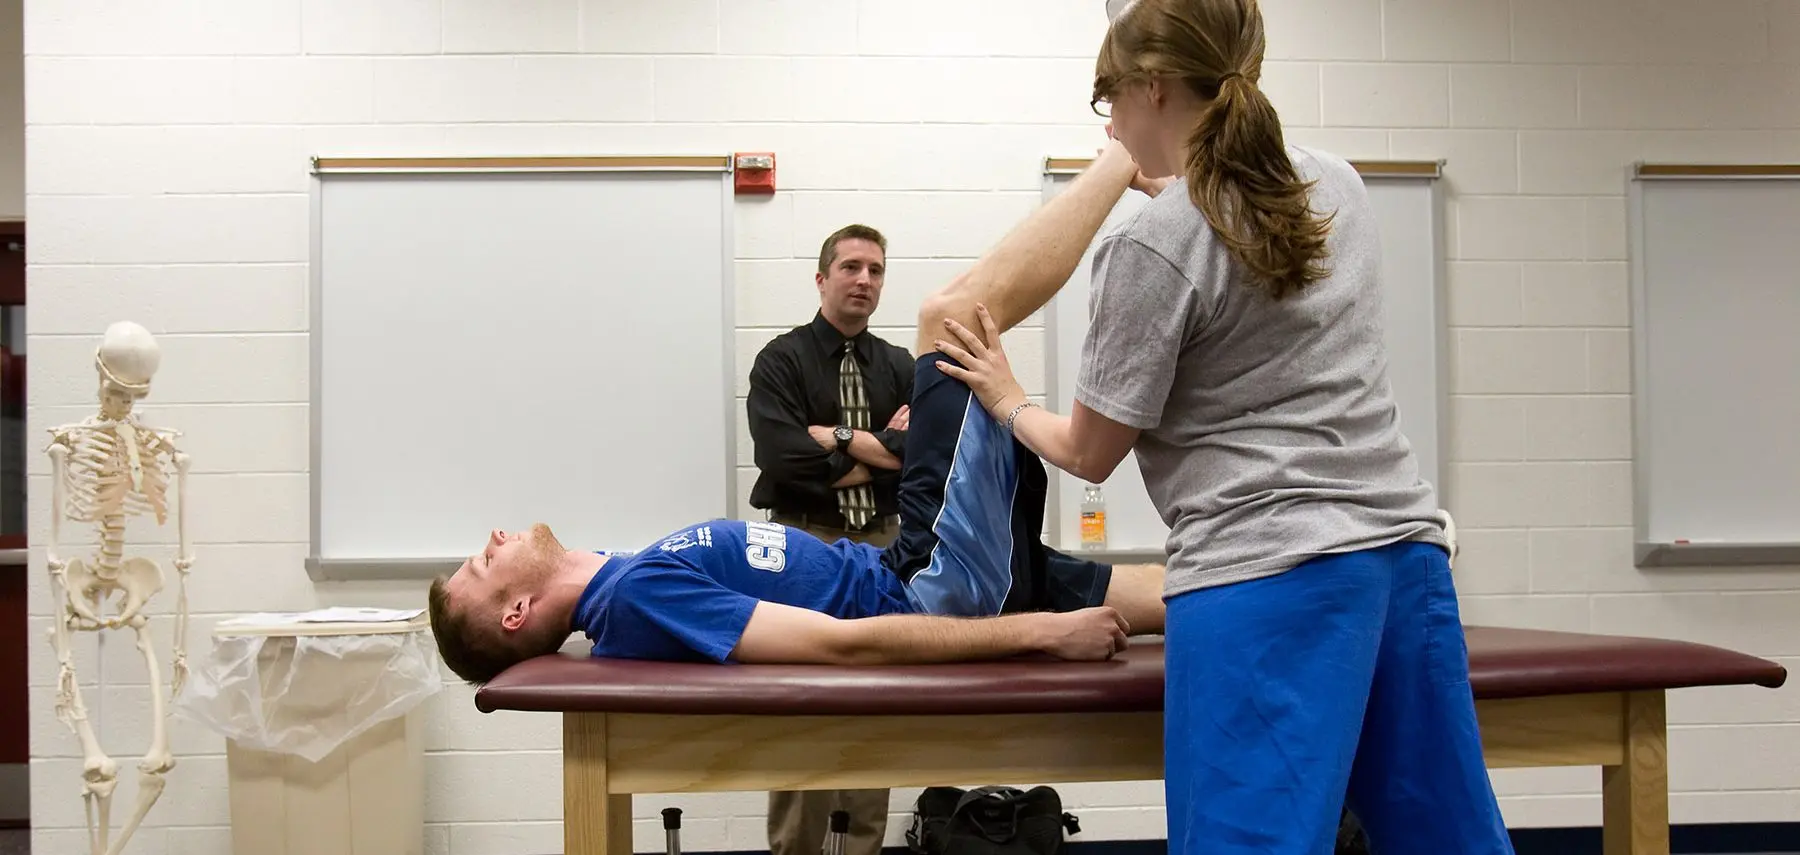 Physical therapist student working with patient.